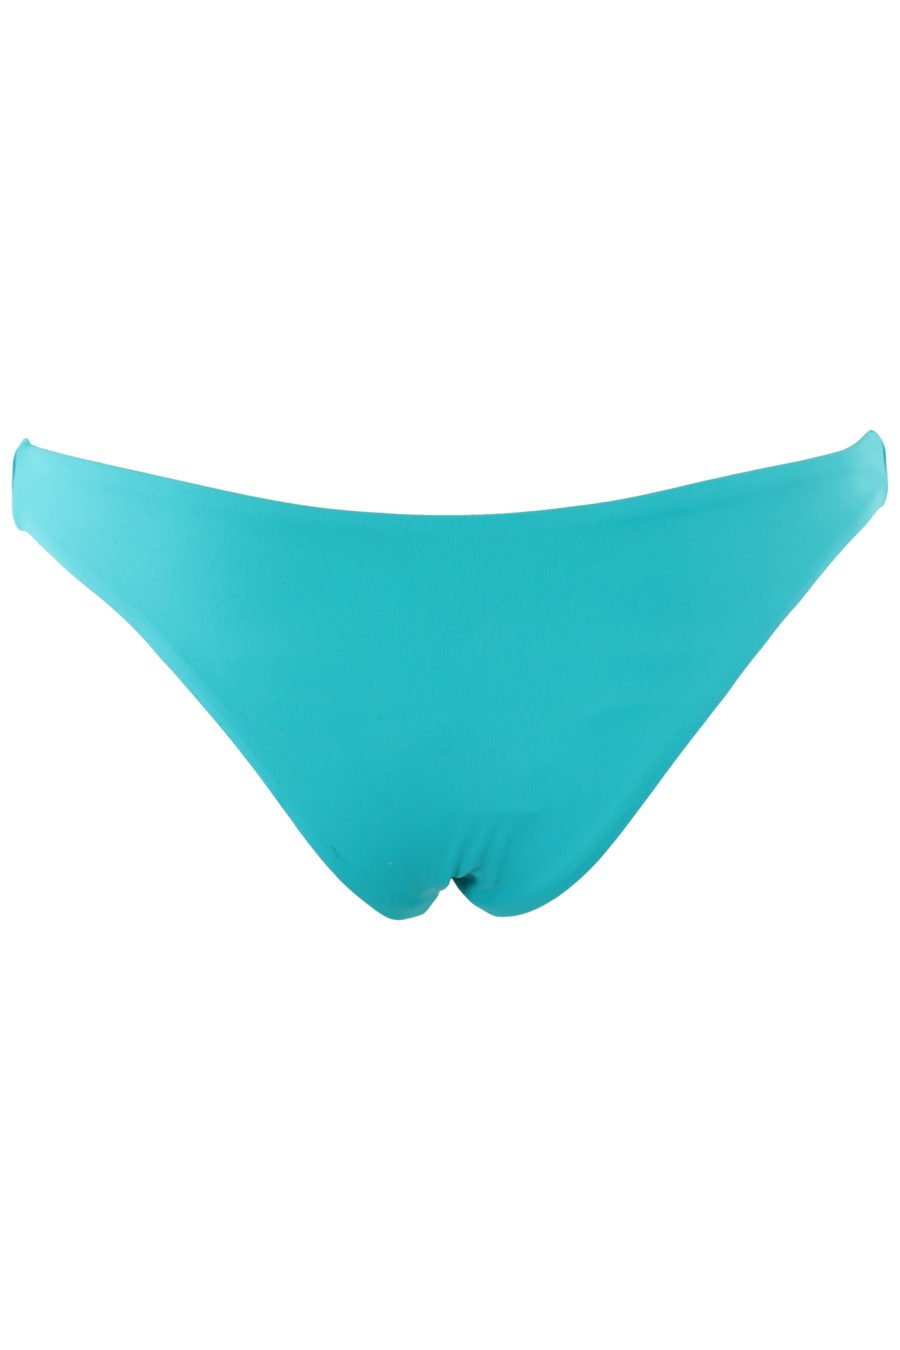 Turquoise blue swimming costume with small metal lettering logo - IMG 1311